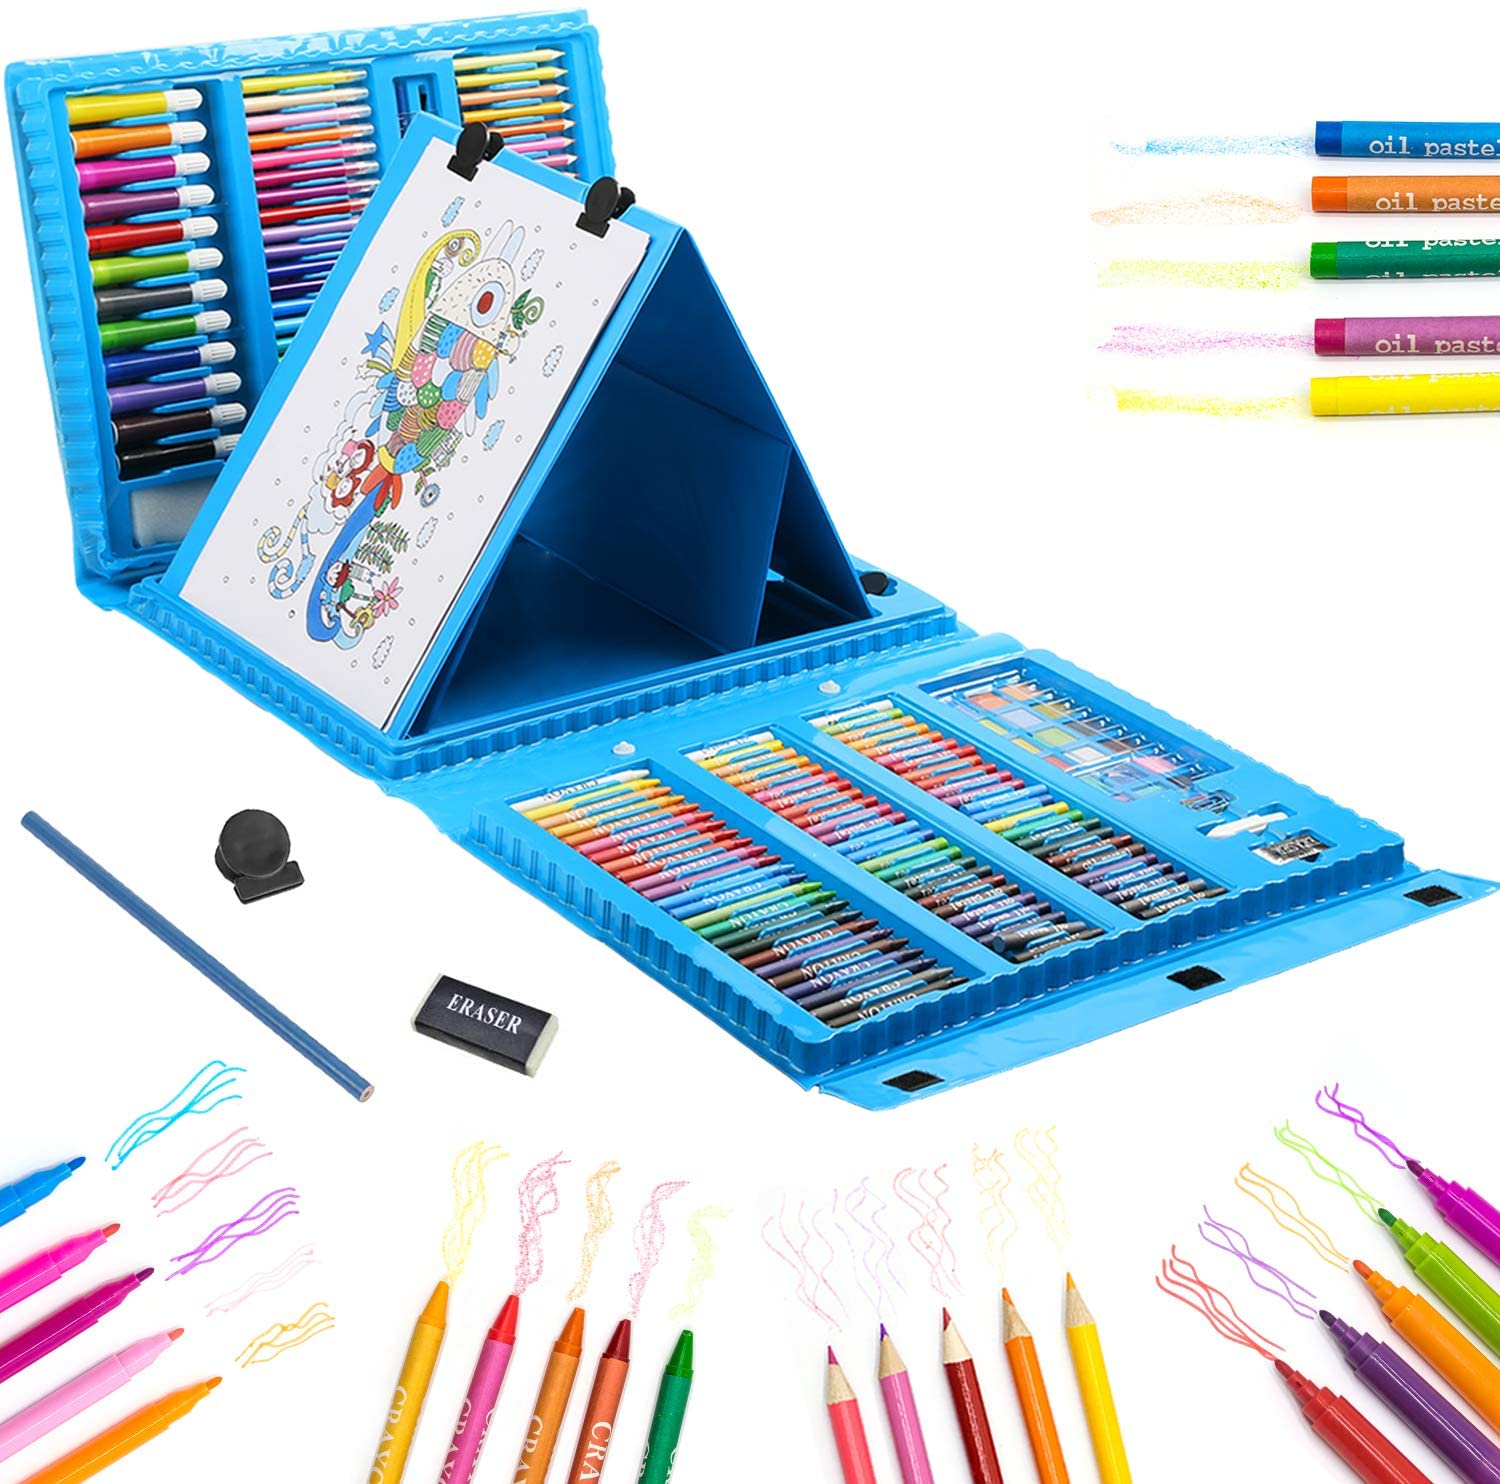 Drawing Kits for Kids 208pcs Art Set - Life Changing Products